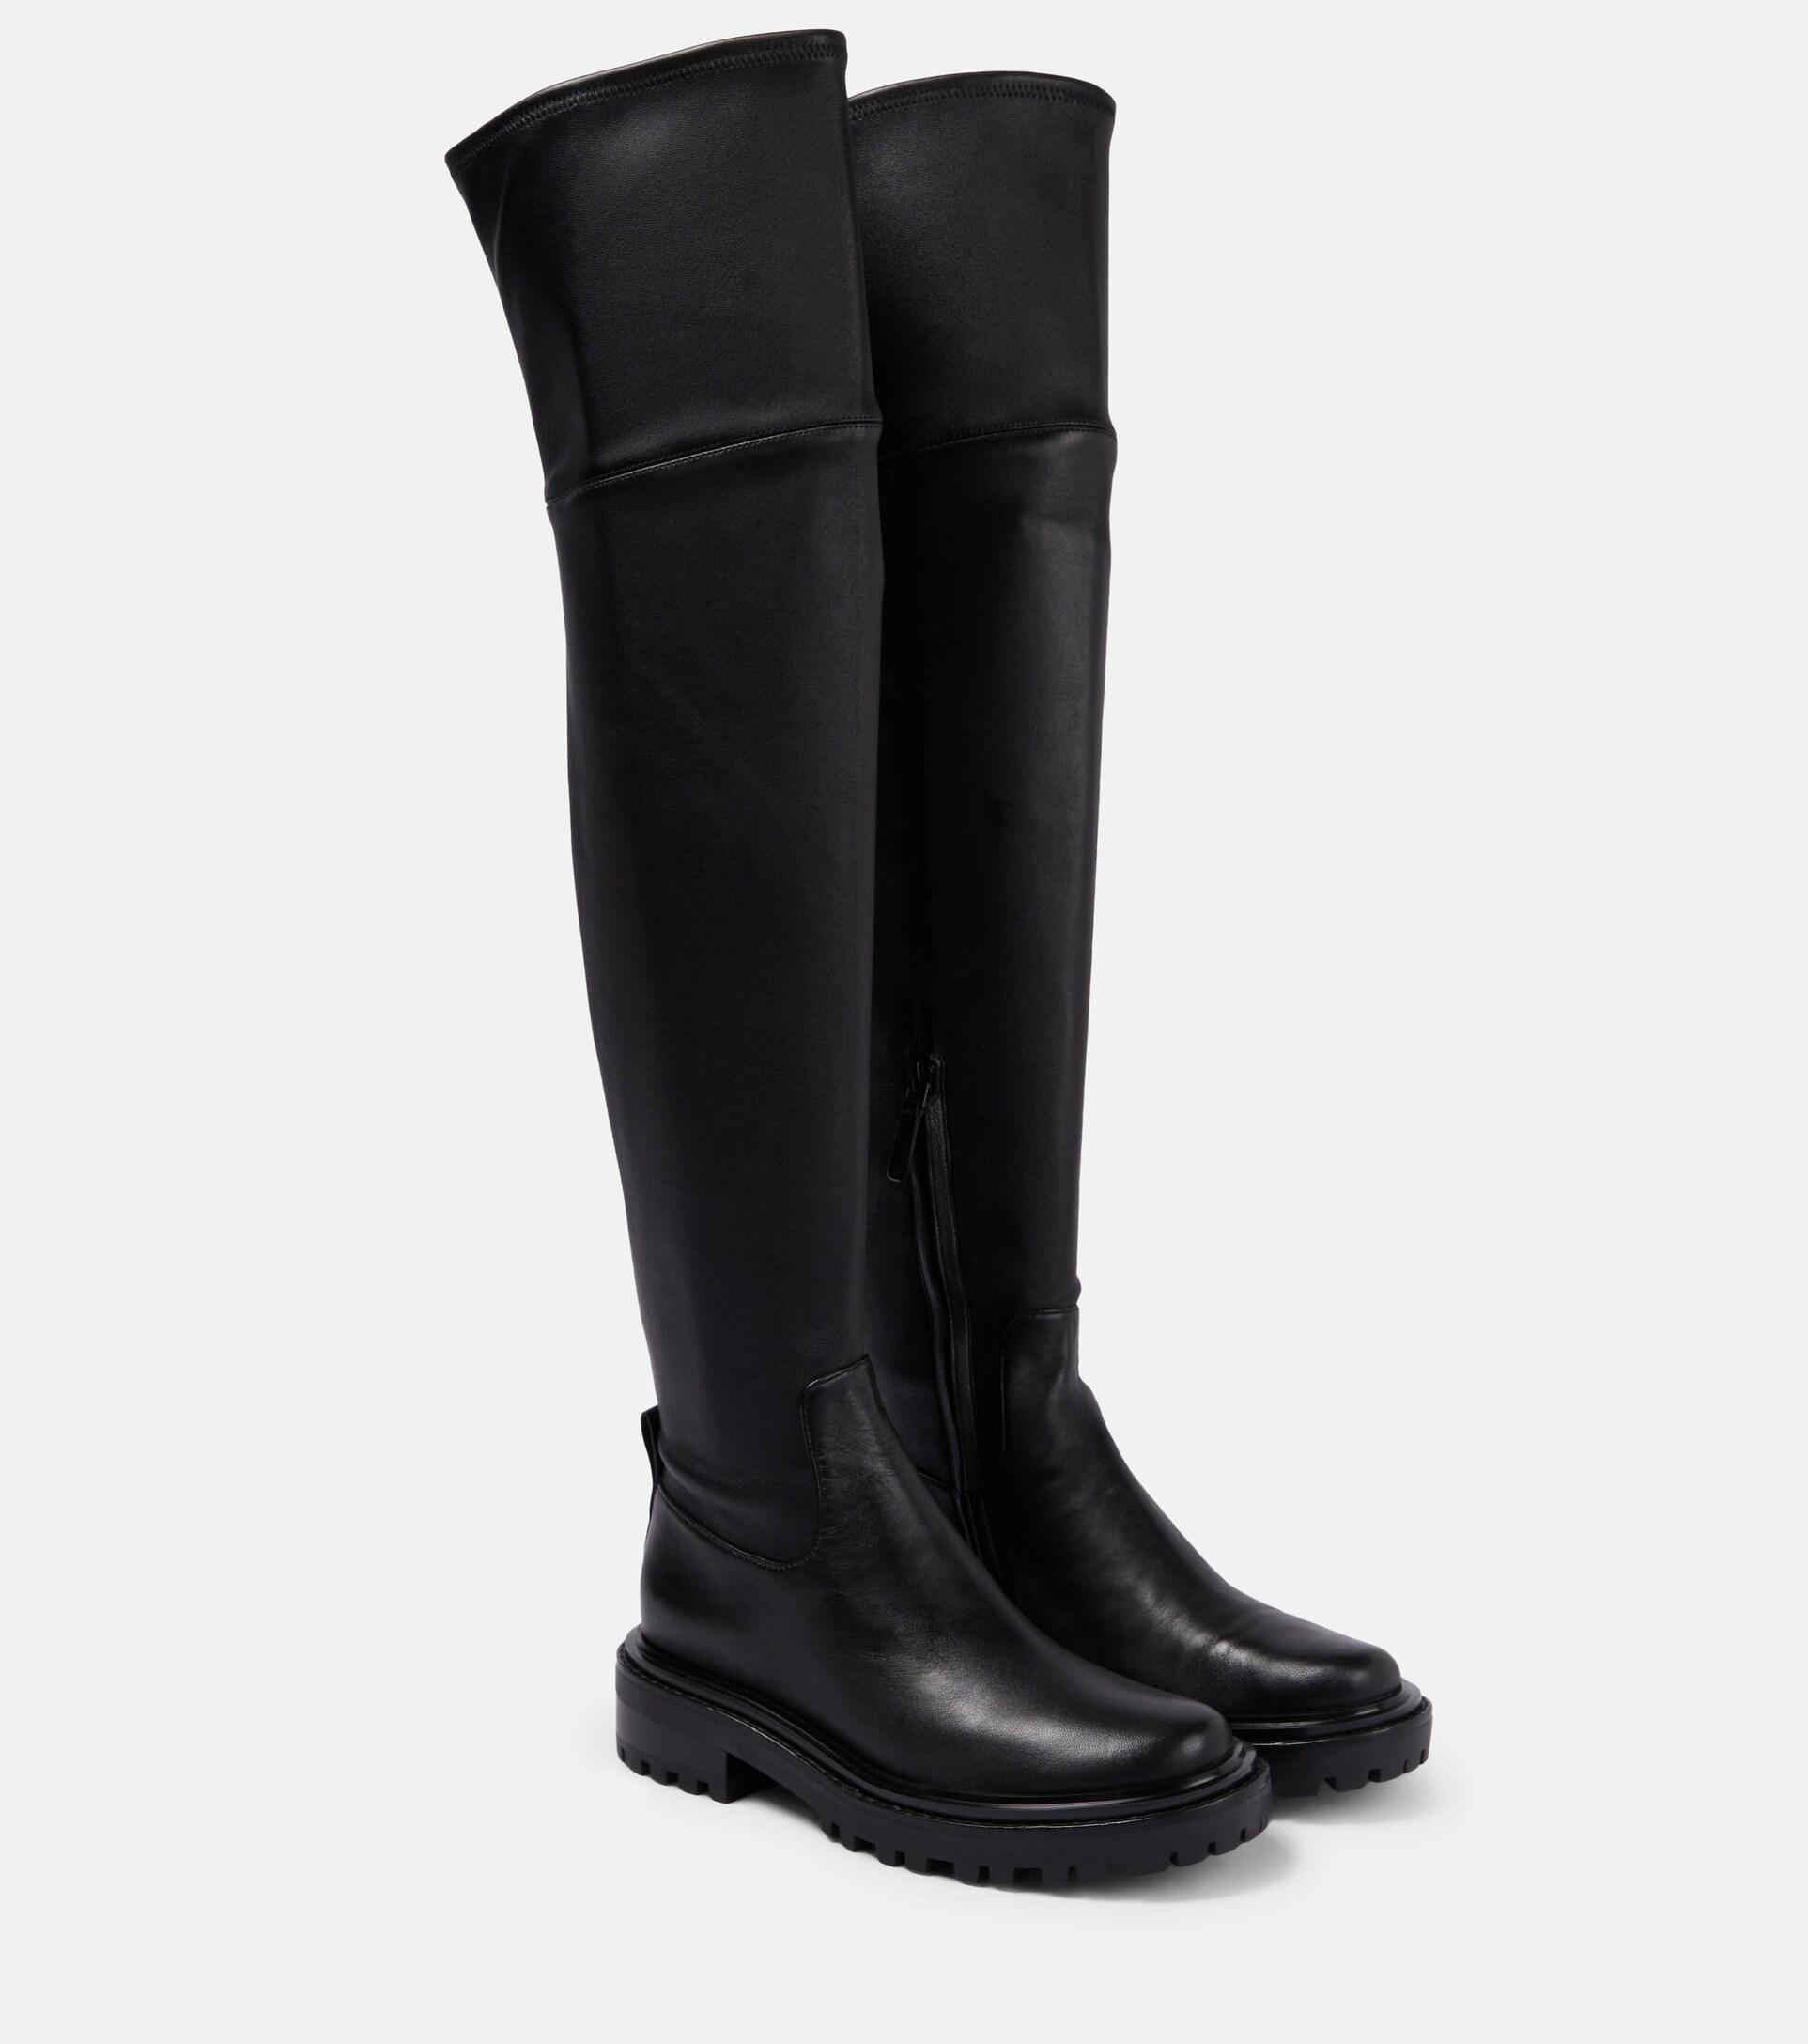 Tory Burch Utility Lug Leather Over-the-knee Boots in Black | Lyst